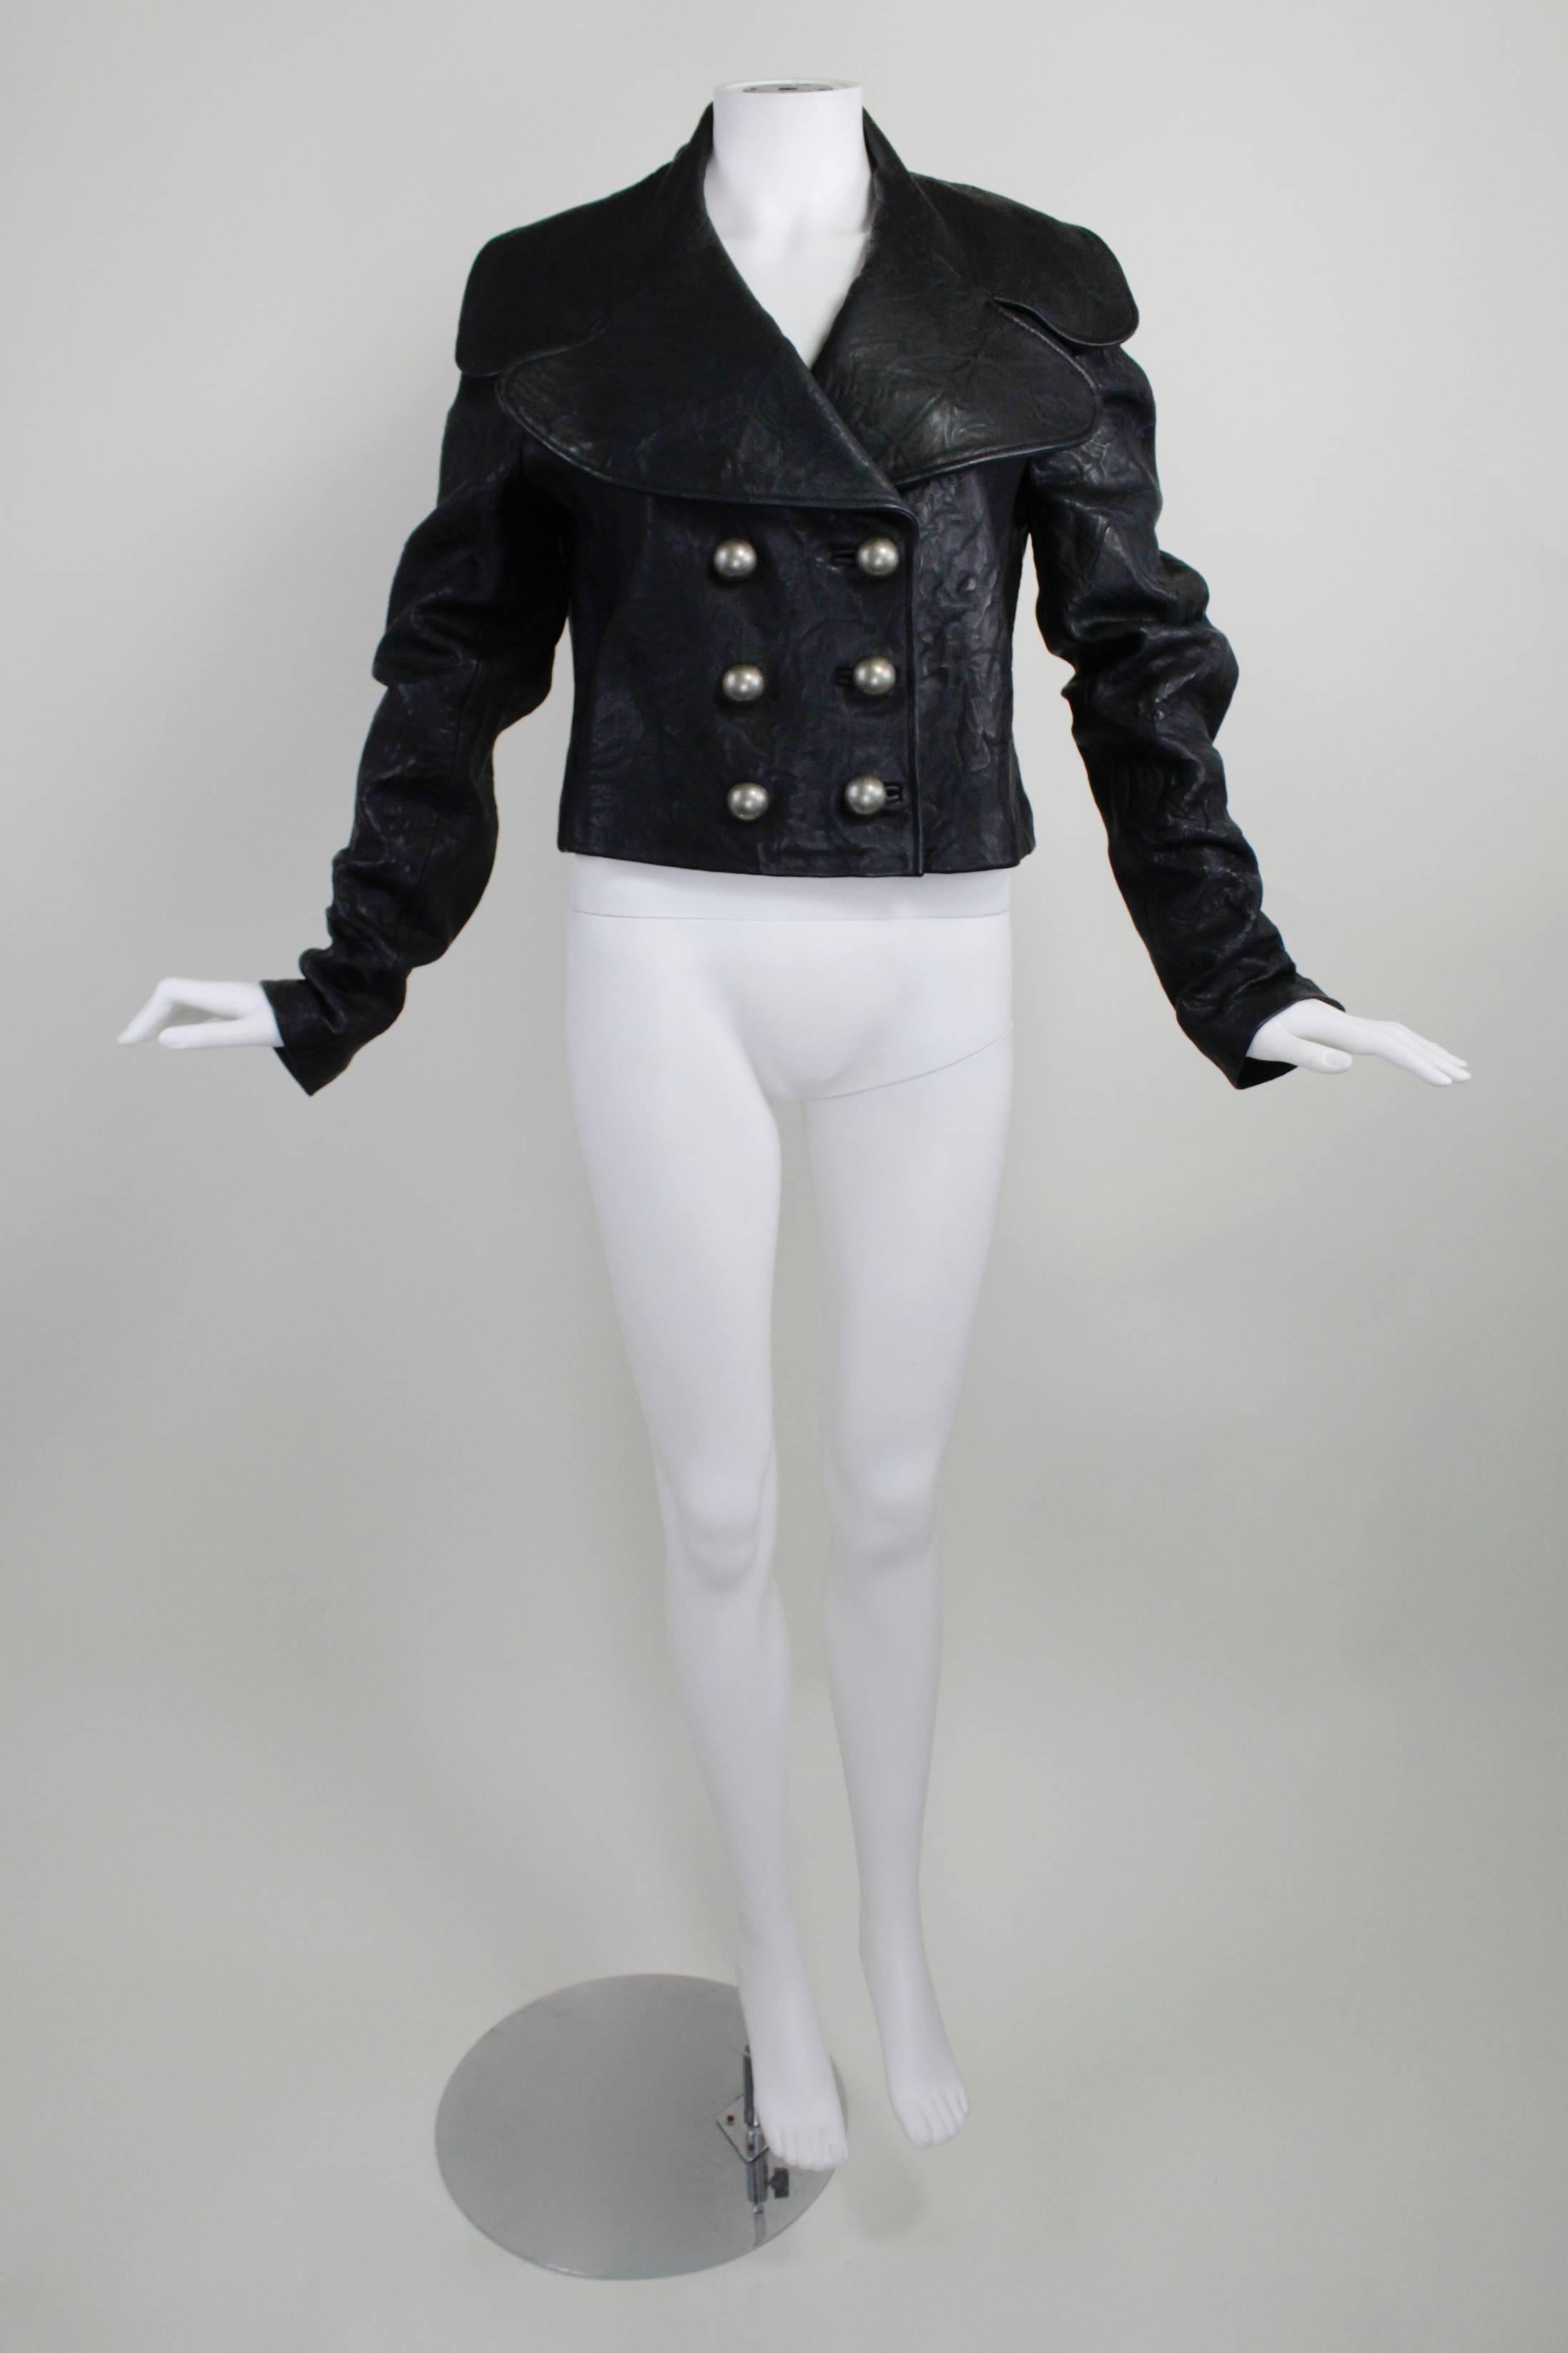 A hearty, rugged double-breasted leather jacket from Thomas Wylde. The jacket features rounded lapels, brass buttons, and a great skull silk lining. 

Measurements--
Bust: 40 inches
Waist: 38 inches
Length, Shoulder to Cuff: 27 inches